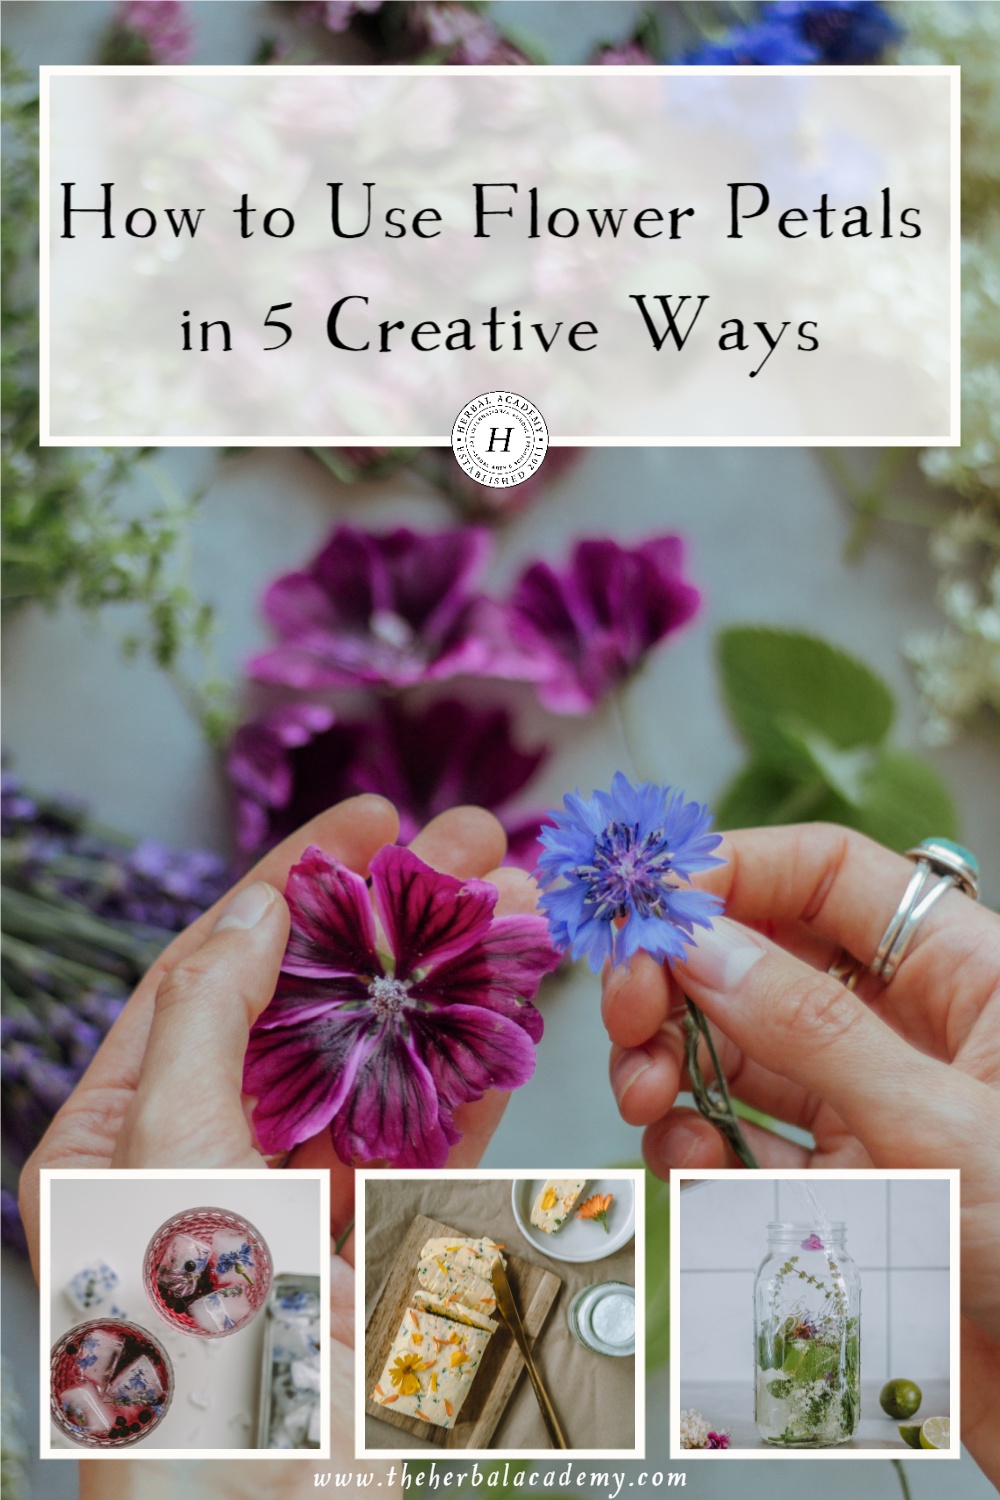 How to Use Flower Petals in 5 Creative Ways | Herbal Academy | To inspire you to take advantage of the endless uses of flower petals, let’s explore how to use flower petals in five creative ways.